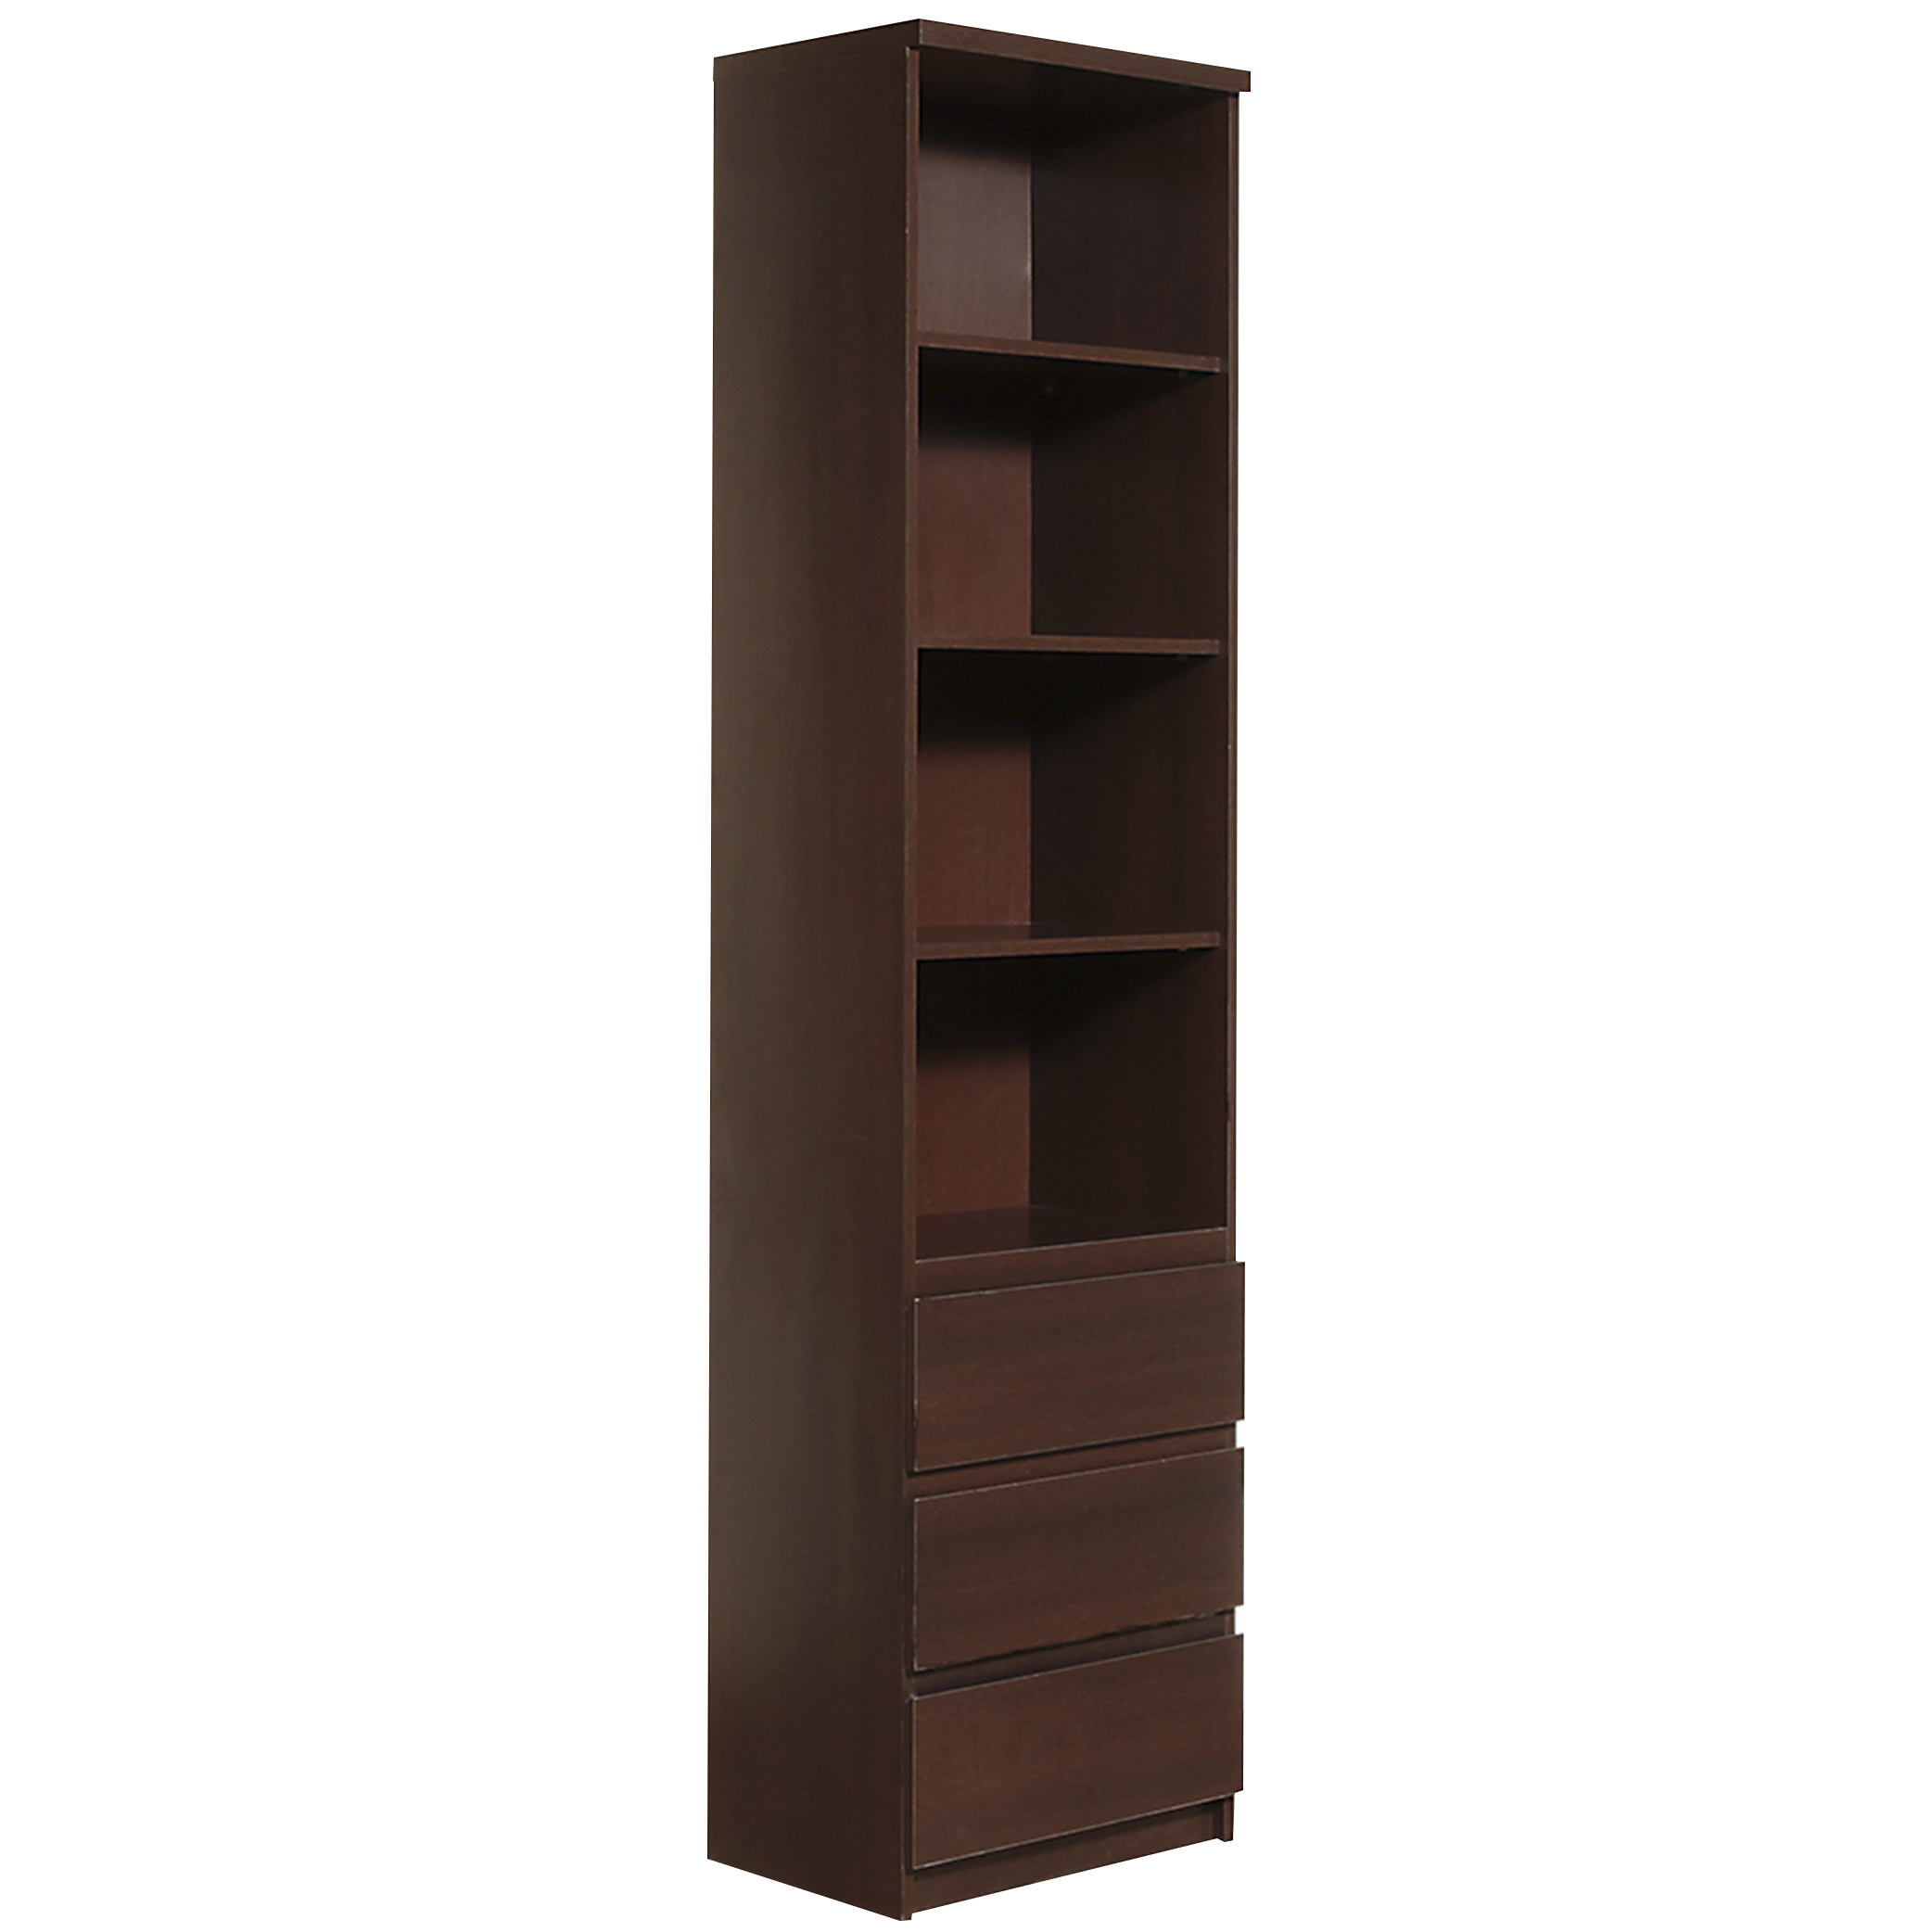 Details About Enzo Dark Mahogany Effect Tall Slim 3 Drawer Bookcase Modern Shelving Unit With Size 2084 X 2084 